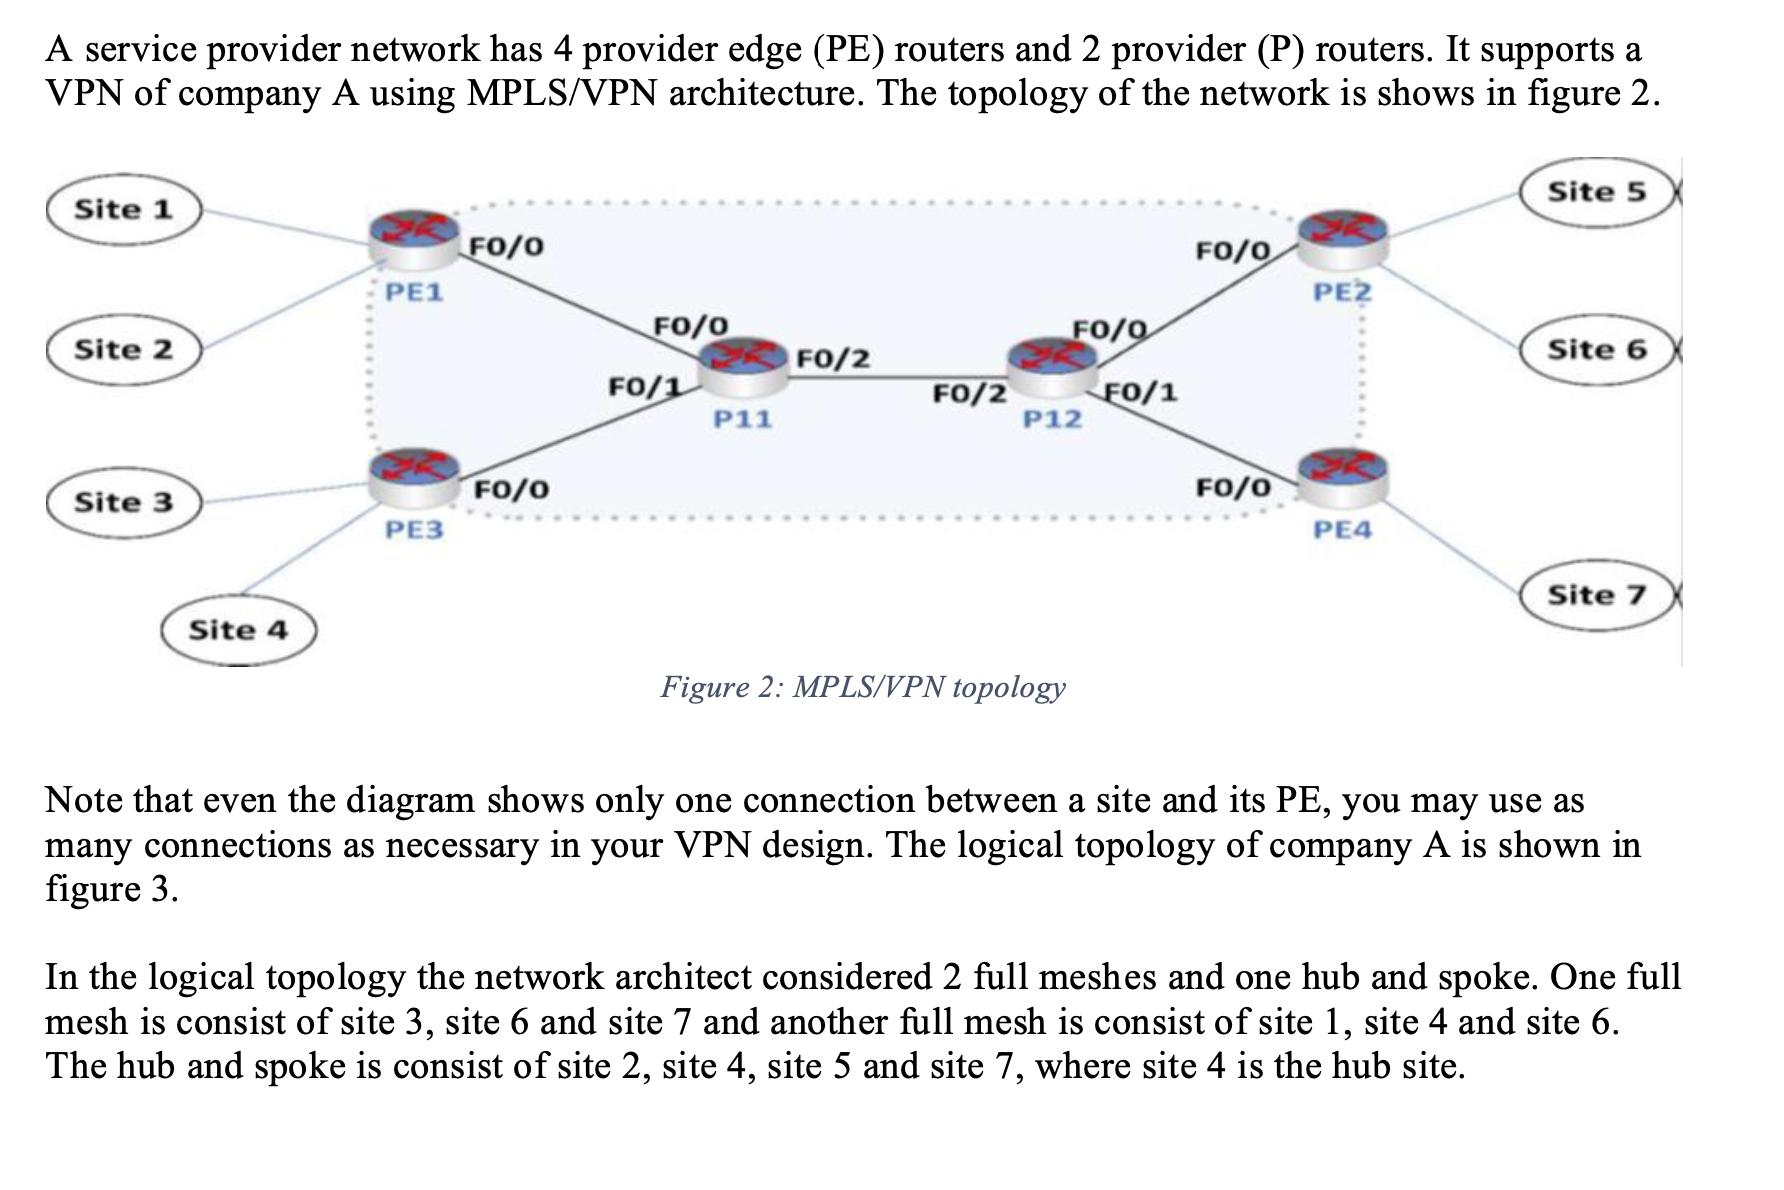 A service provider network has 4 provider edge (PE) routers and 2 provider (P) routers. It supports a VPN of